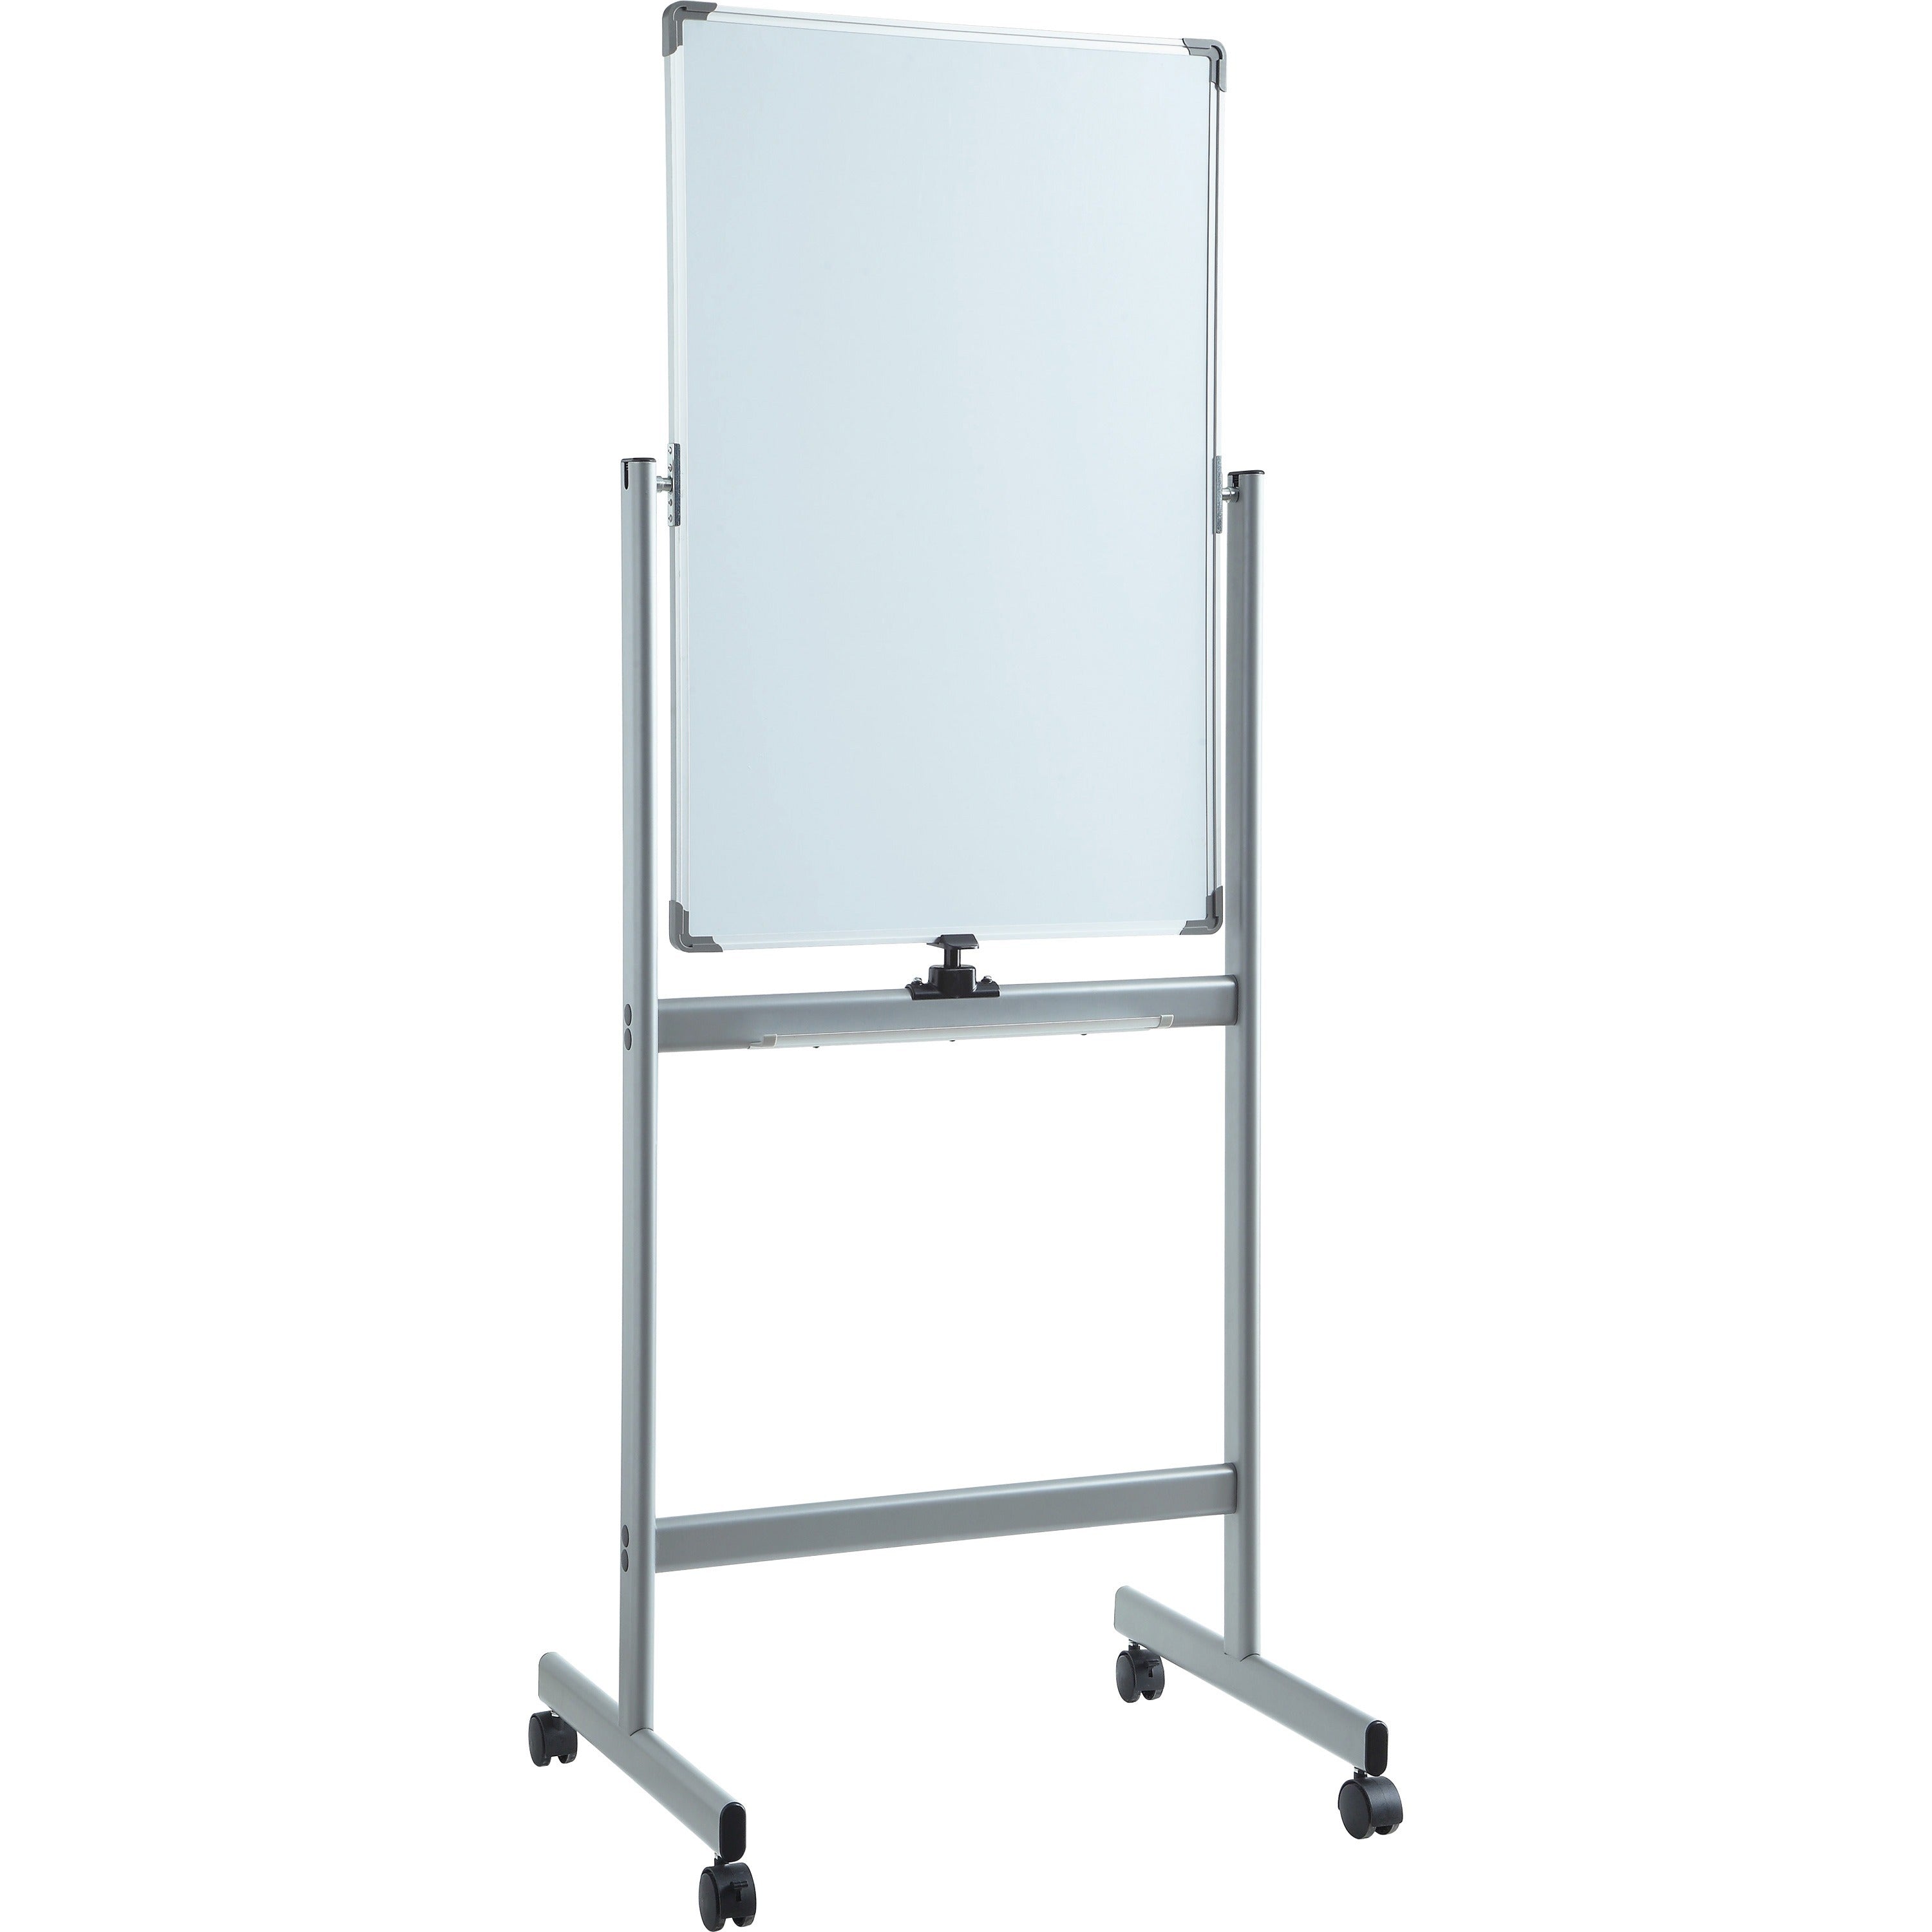 lorell-double-sided-magnetic-whiteboard-easel-24-2-ft-width-x-36-3-ft-height-white-surface-square-vertical-floor-standing-magnetic-1-each_llr52567 - 1